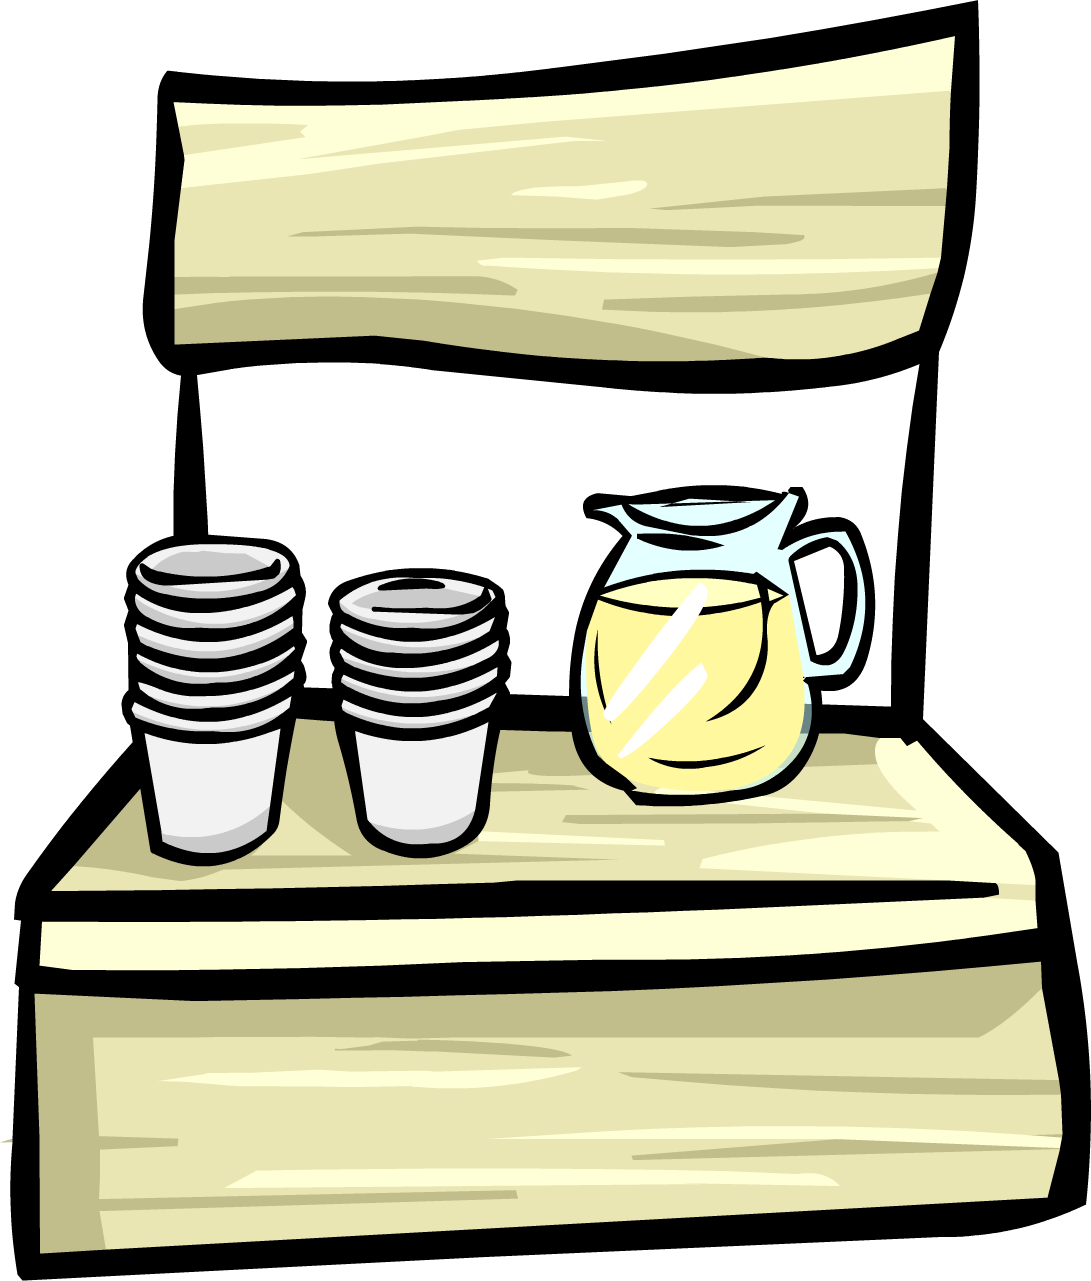 A Lemonade Stand As Seen On The Lemonade Stand Background - Lemonade Stand Clipart Png (1091x1281)